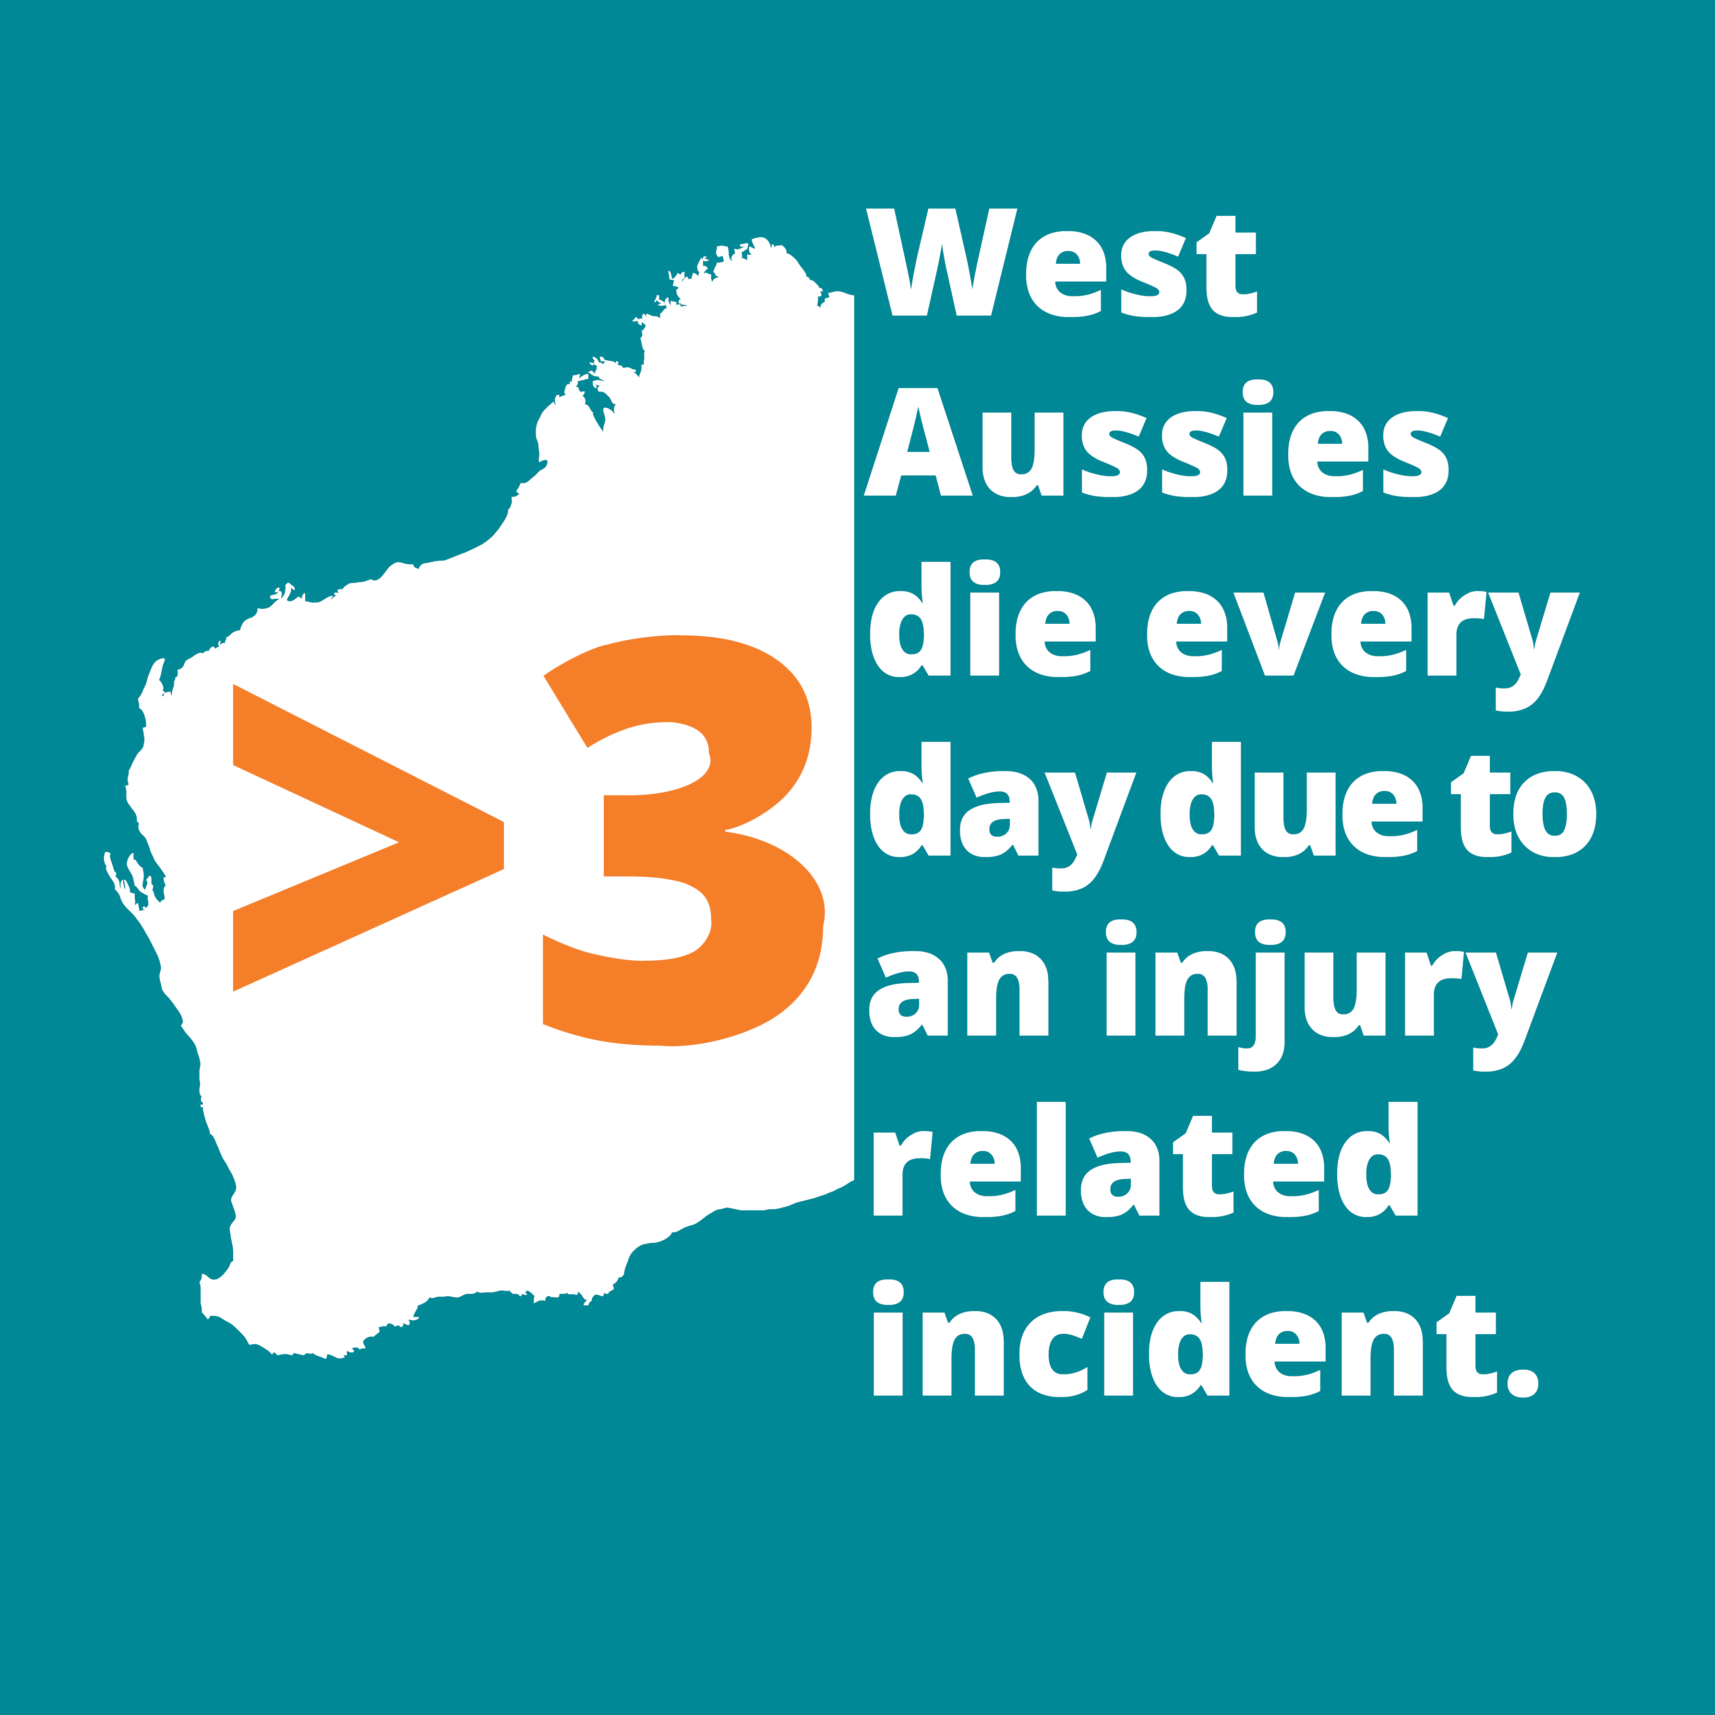 More than 3 Western Australians die every day due to an injury-related incident. Infographic